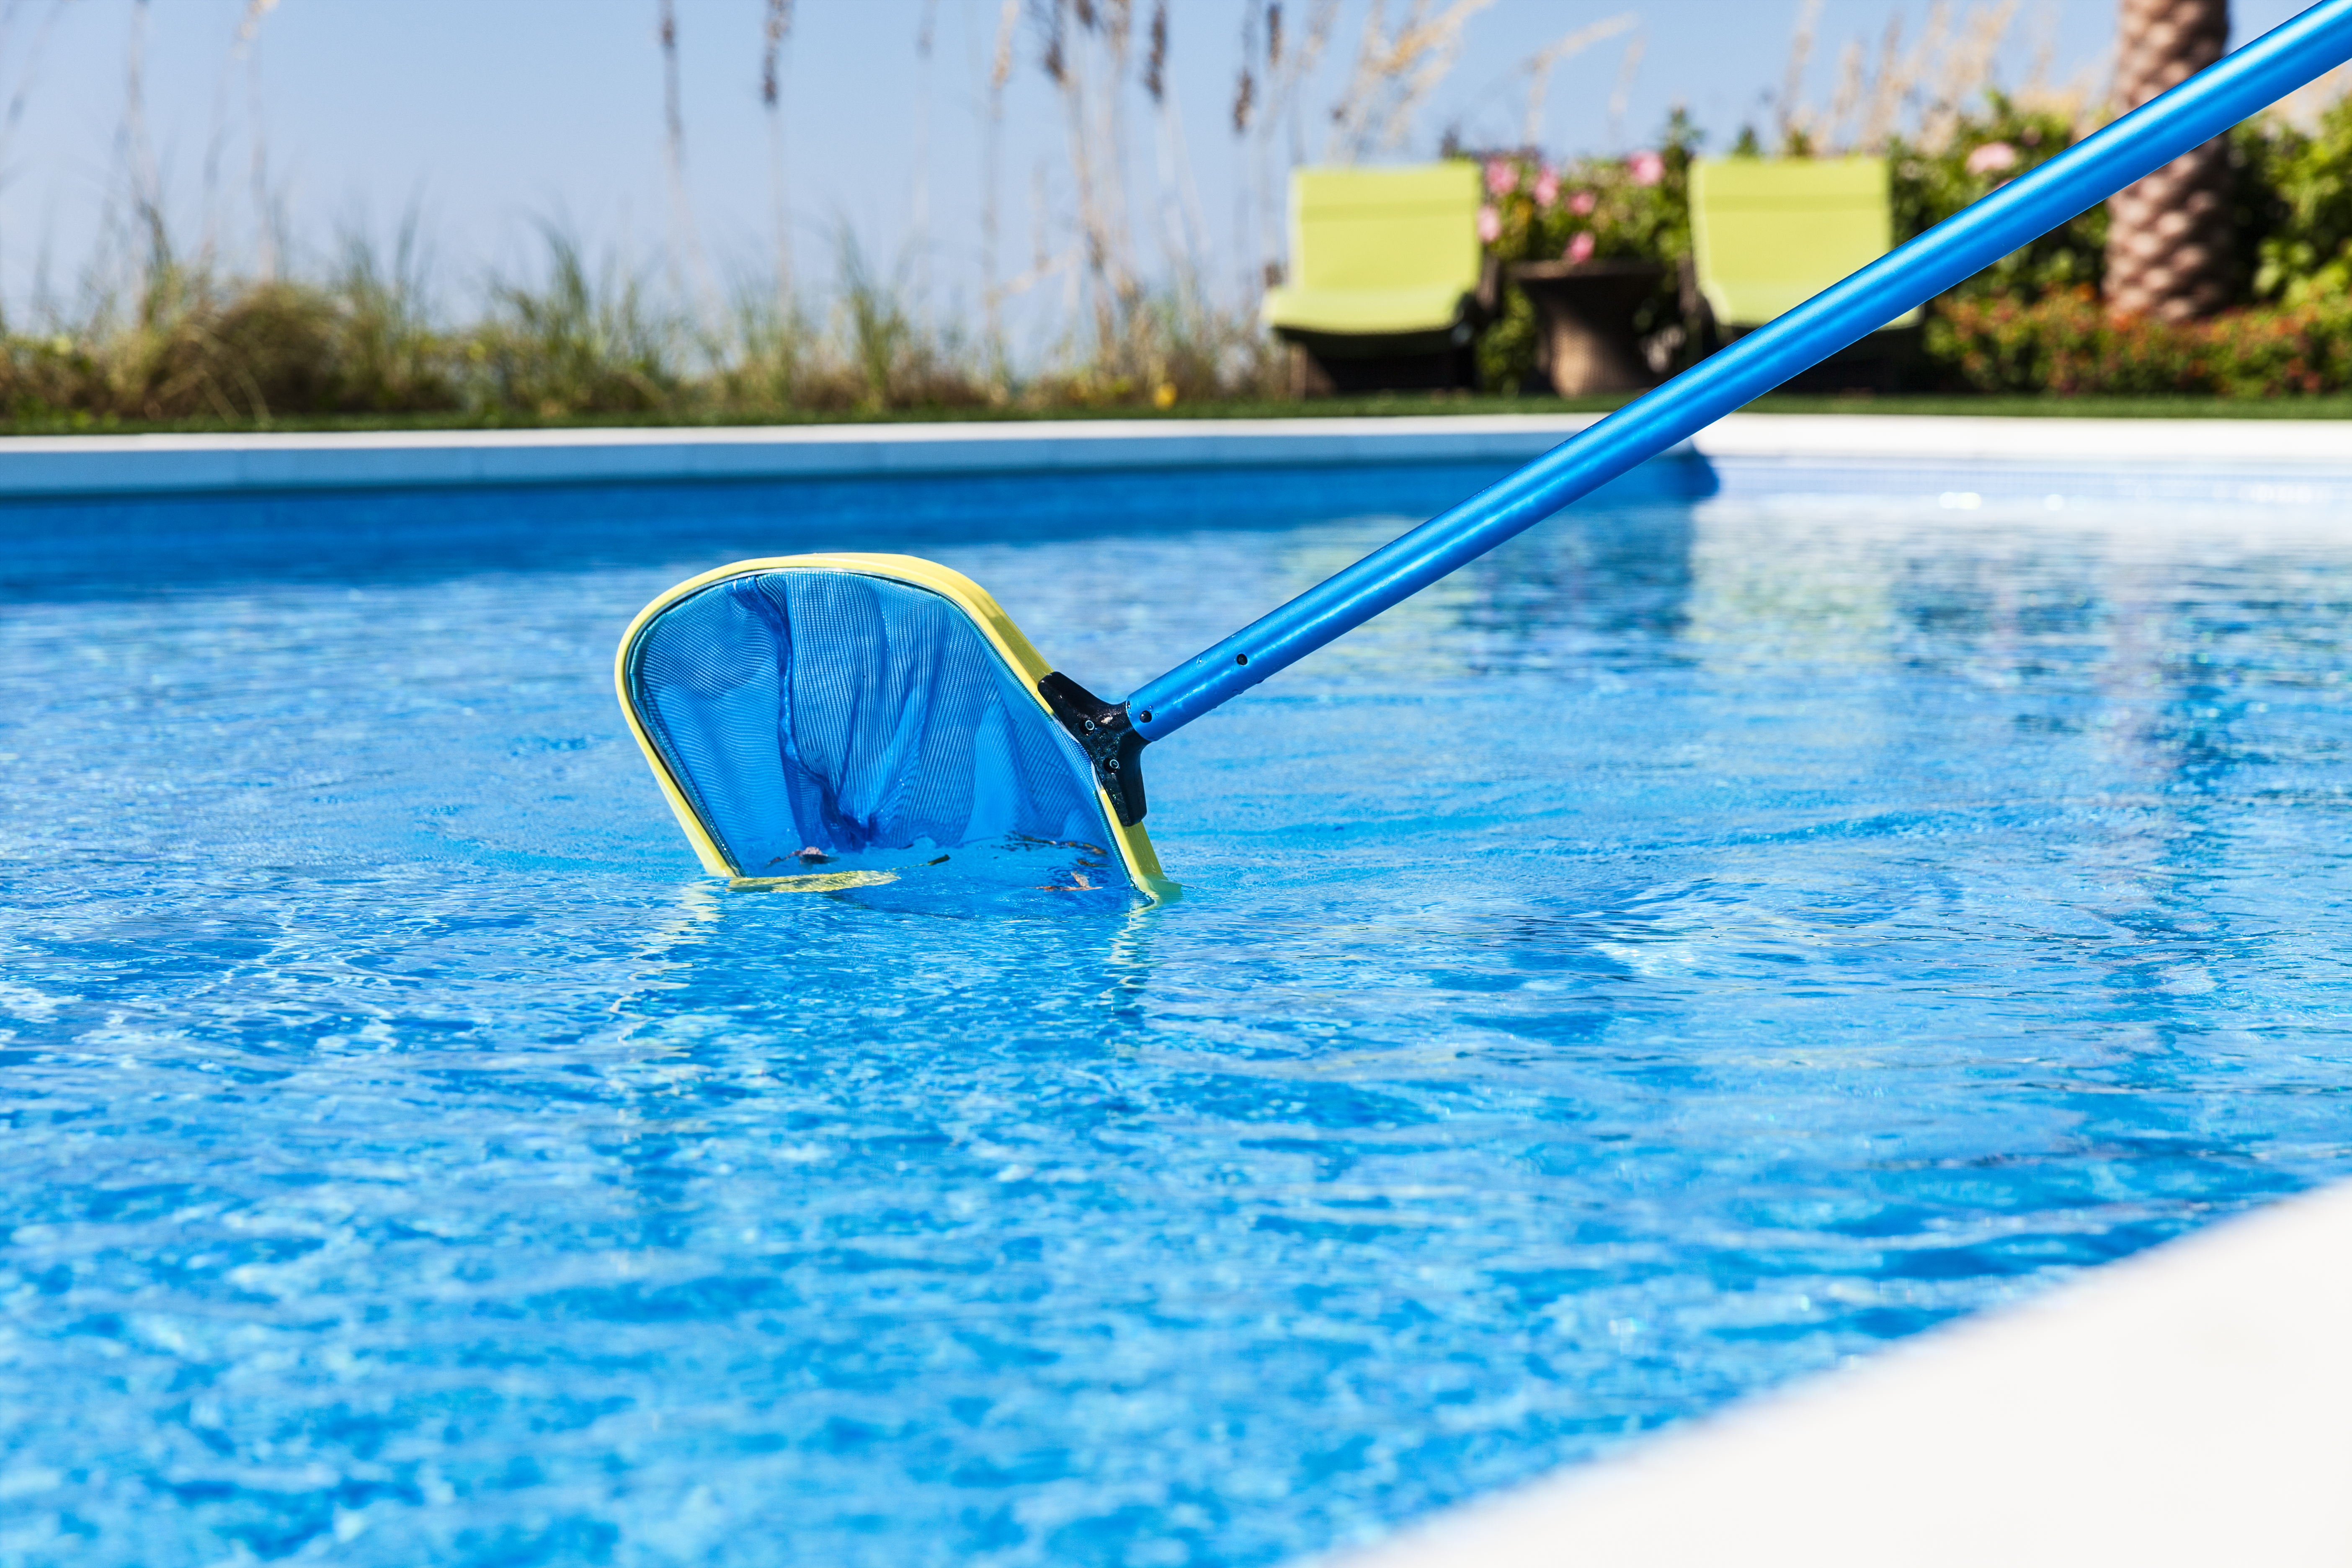 How to Get Rid of Pollen in your Pool (and other Small Debris